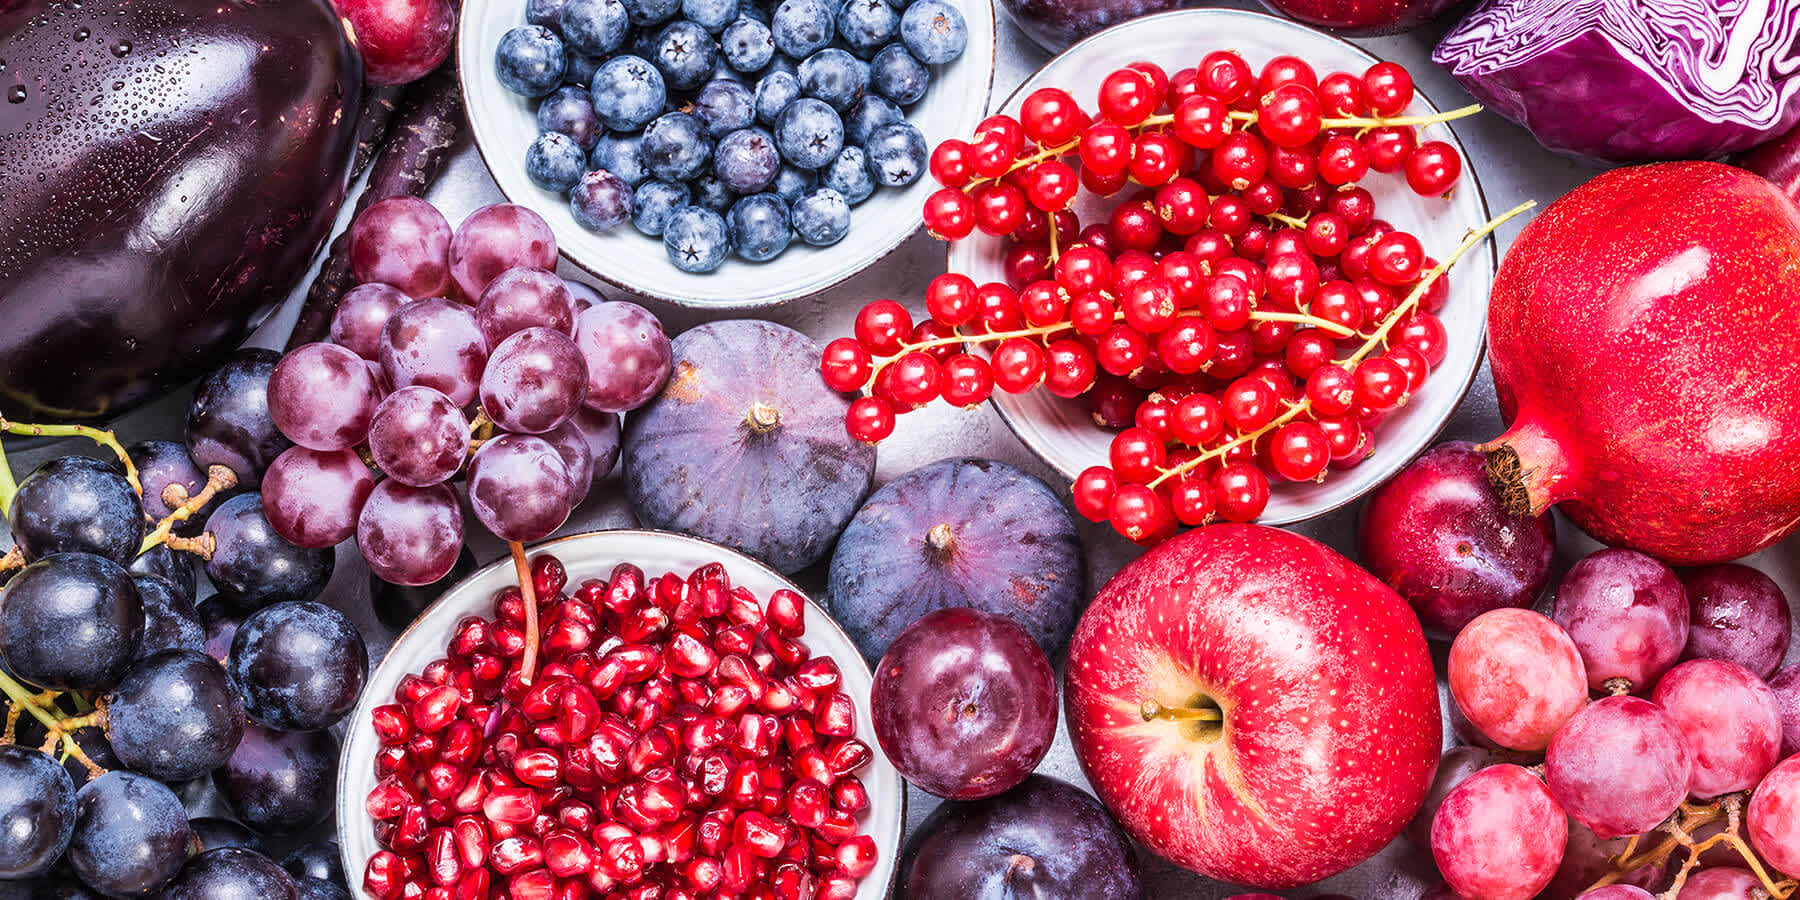 Variety of fresh fruit such as blueberries which may help reduce inflammation